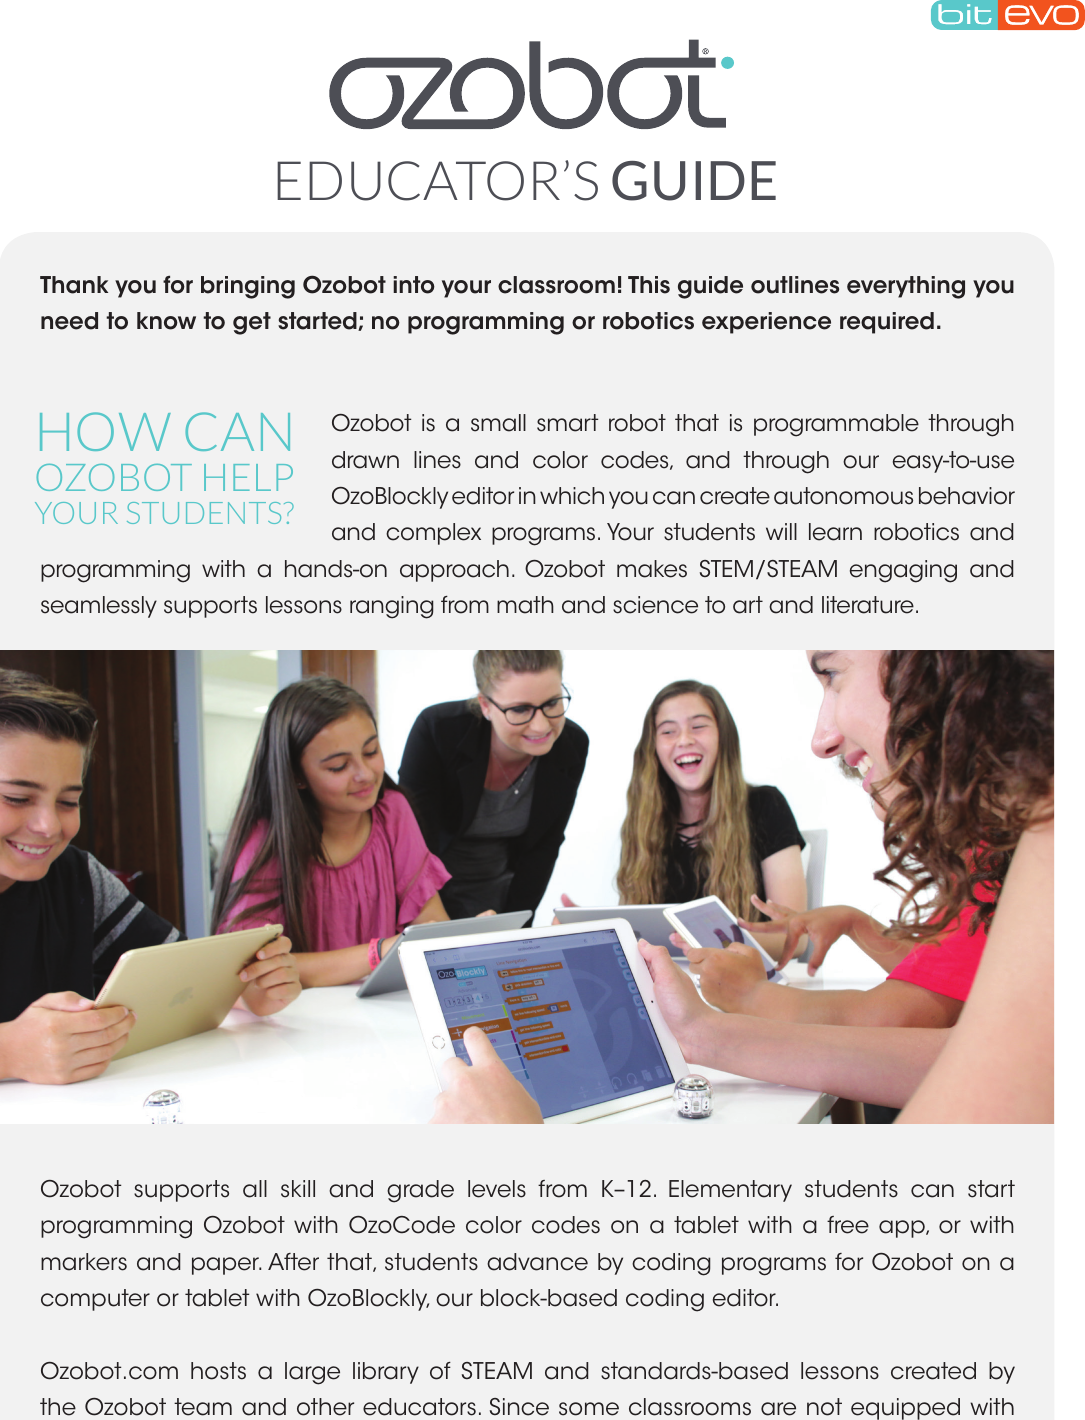 Page 1 of 8 - Ozobot-educators-guide